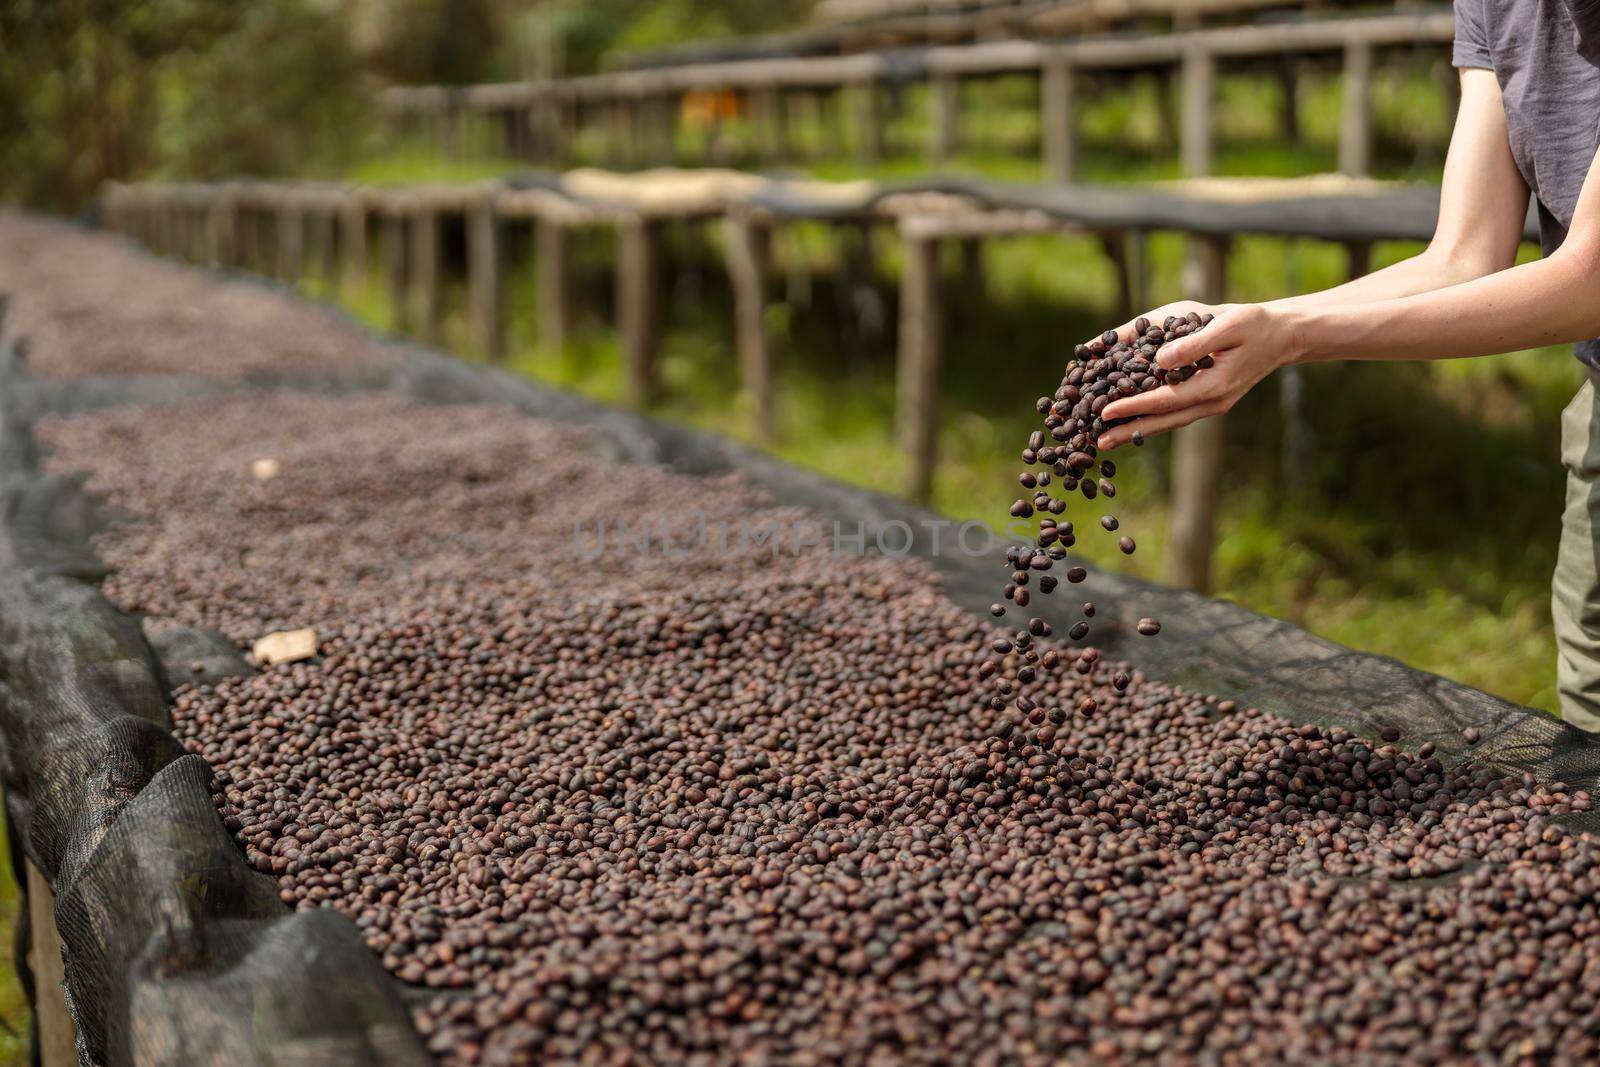 Woman pouring coffee beans into the drying stages at the farm by Yaroslav_astakhov